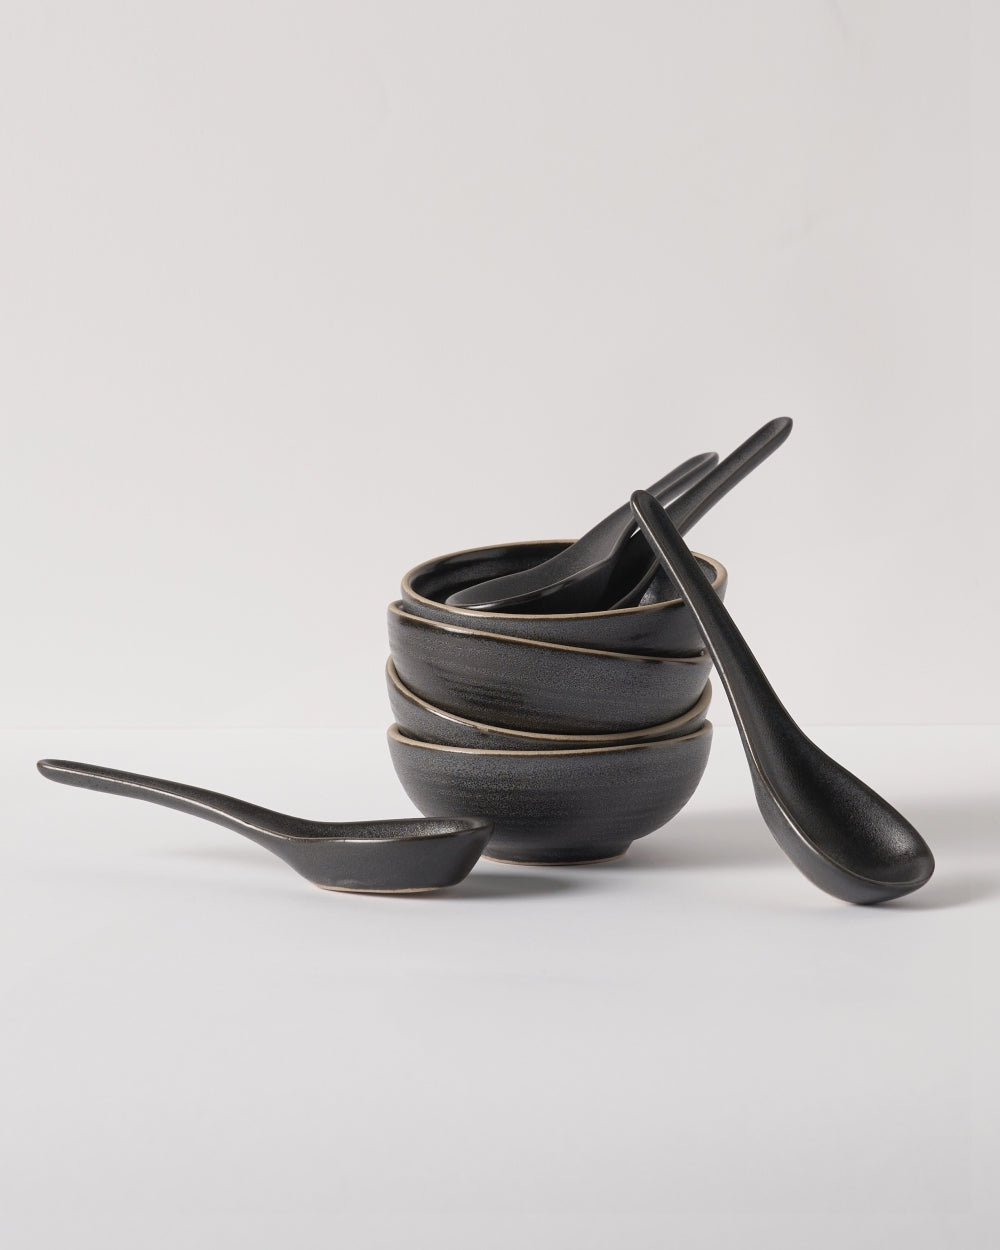 The Essential Wok and Accessories Set